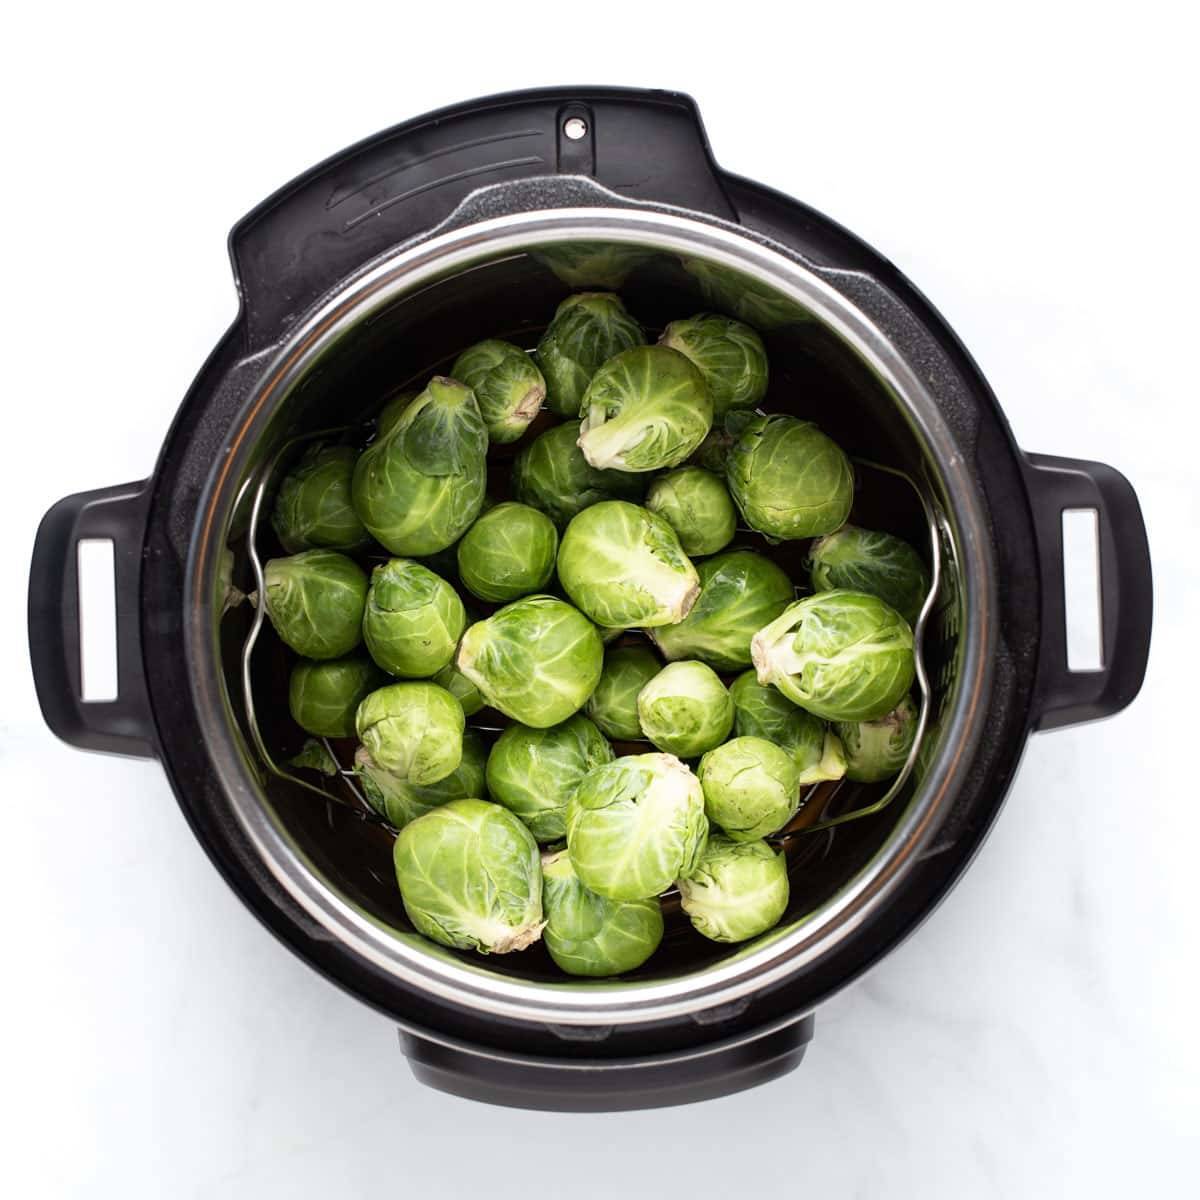 Brussels sprouts in the Instant Pot.